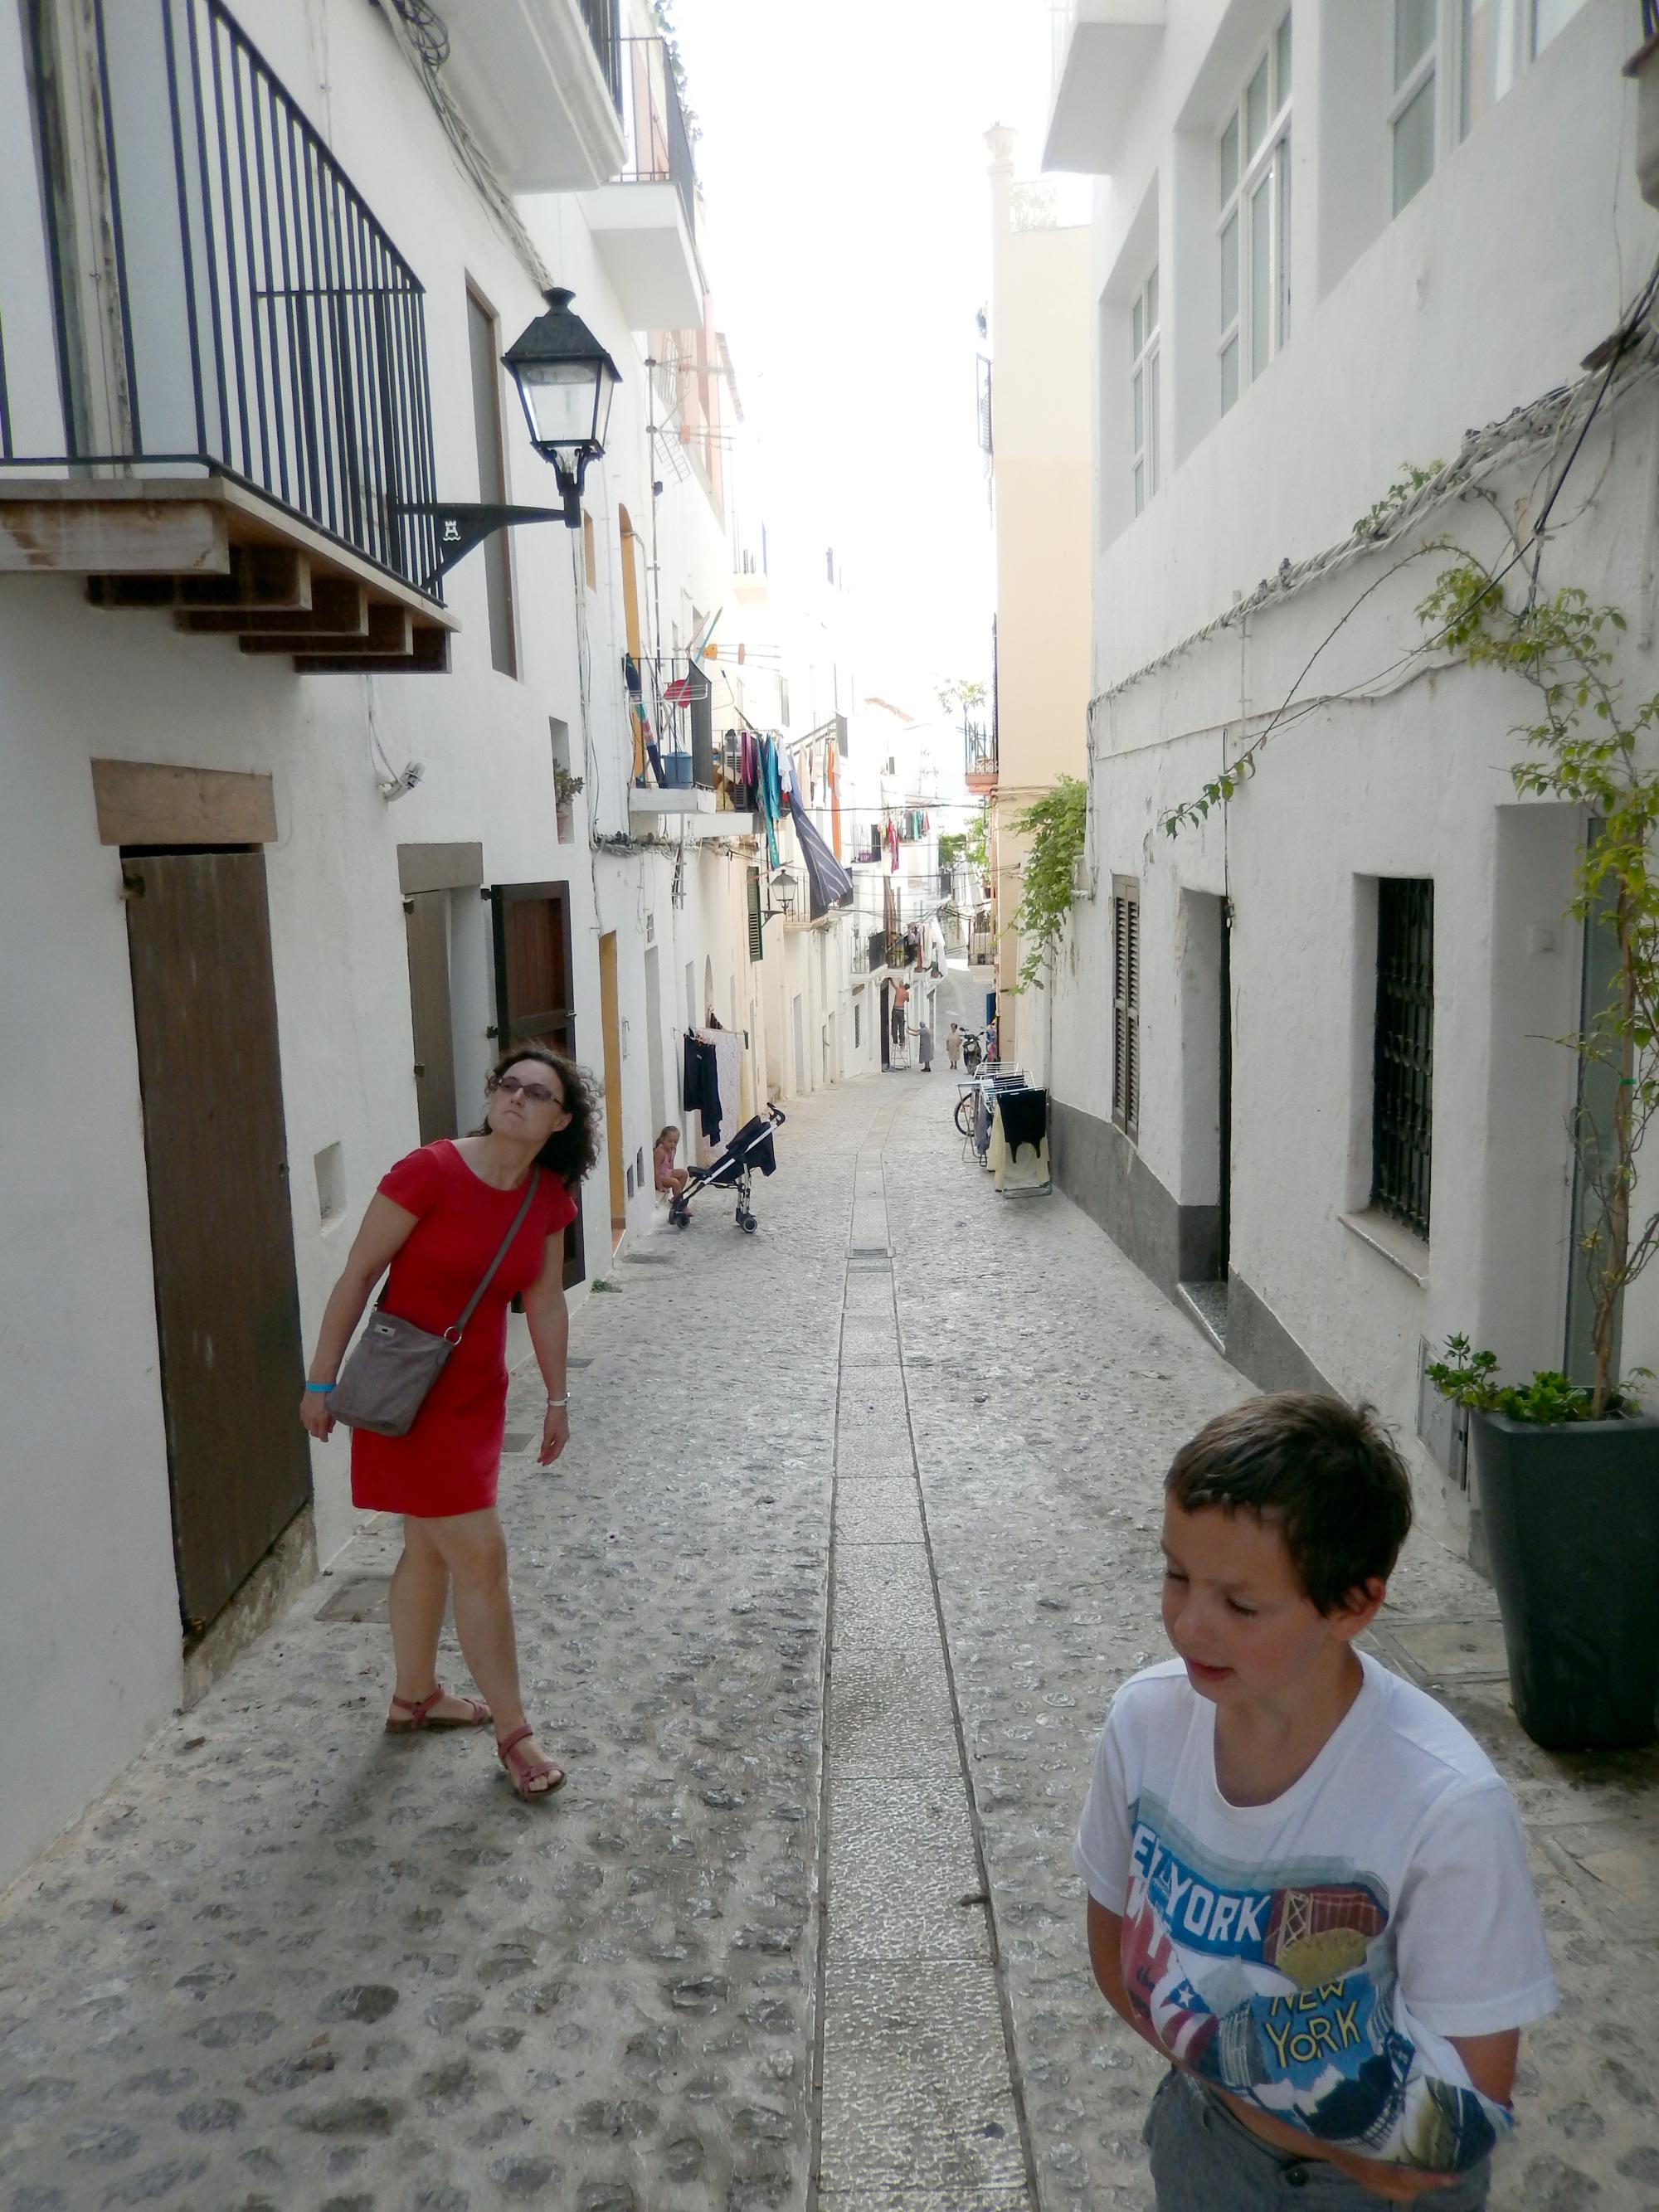 Balearic Islands - Streets Of Ibiza Old Town